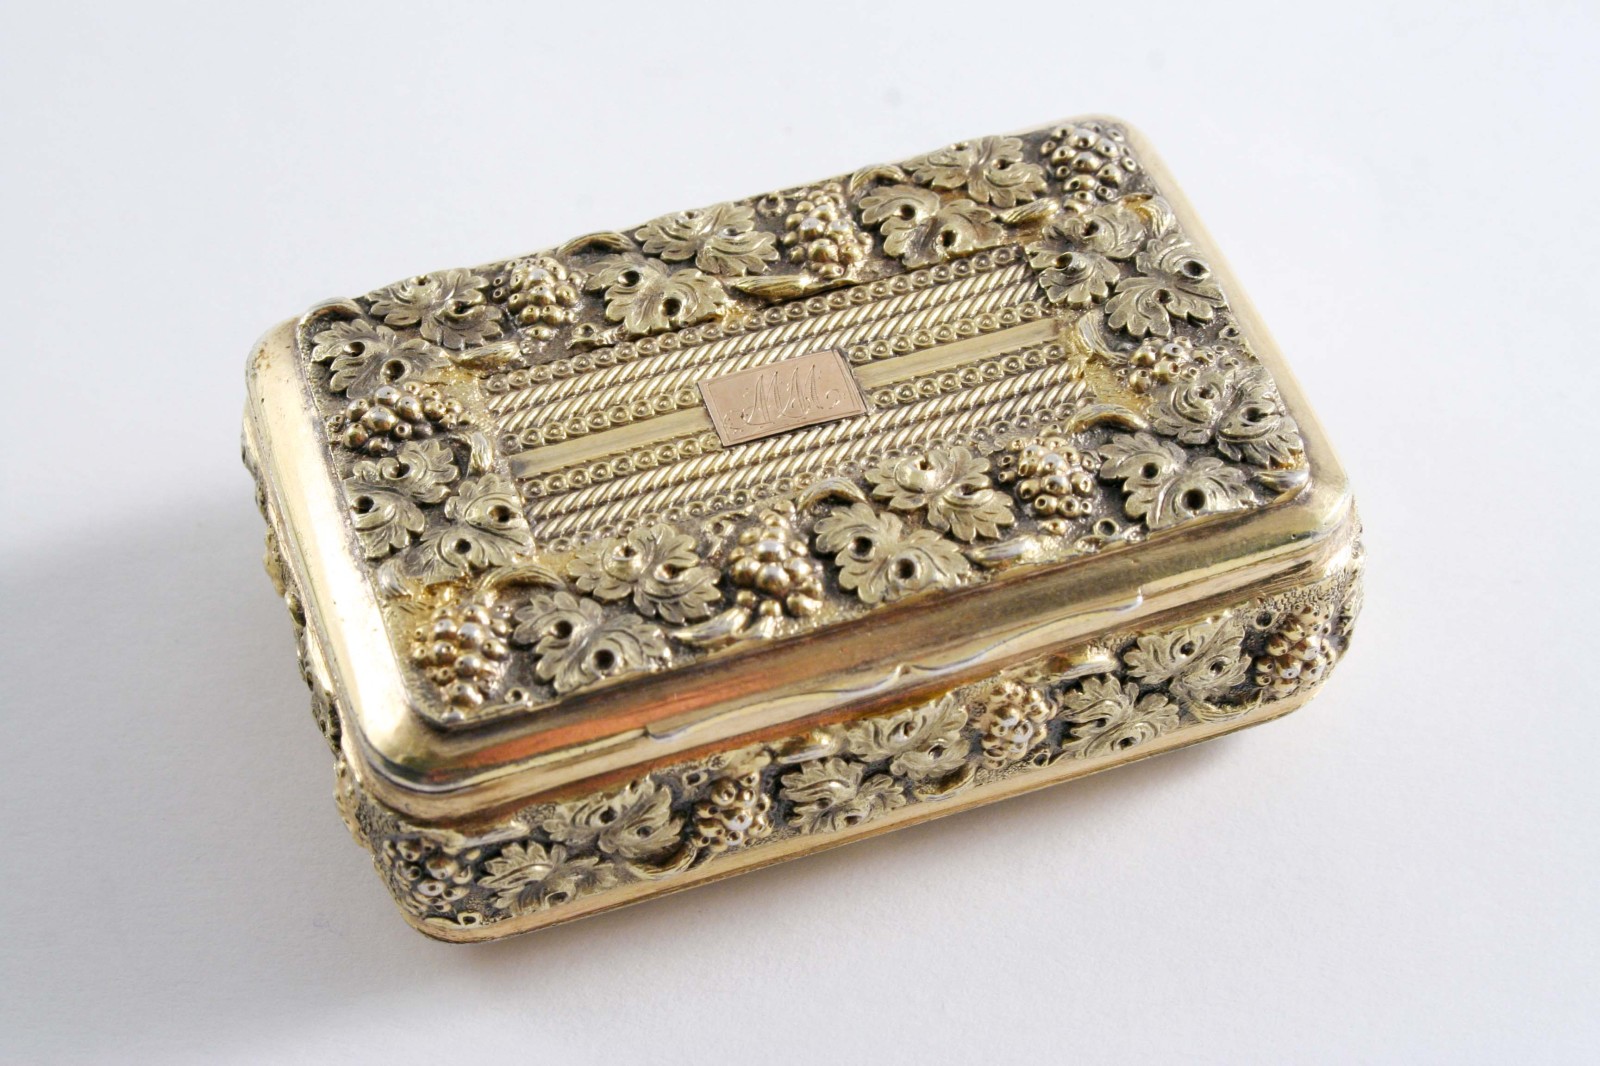 A GEORGE III SMALL SILVERGILT SNUFF BOX oblong with rounded corners decorated in relief around the